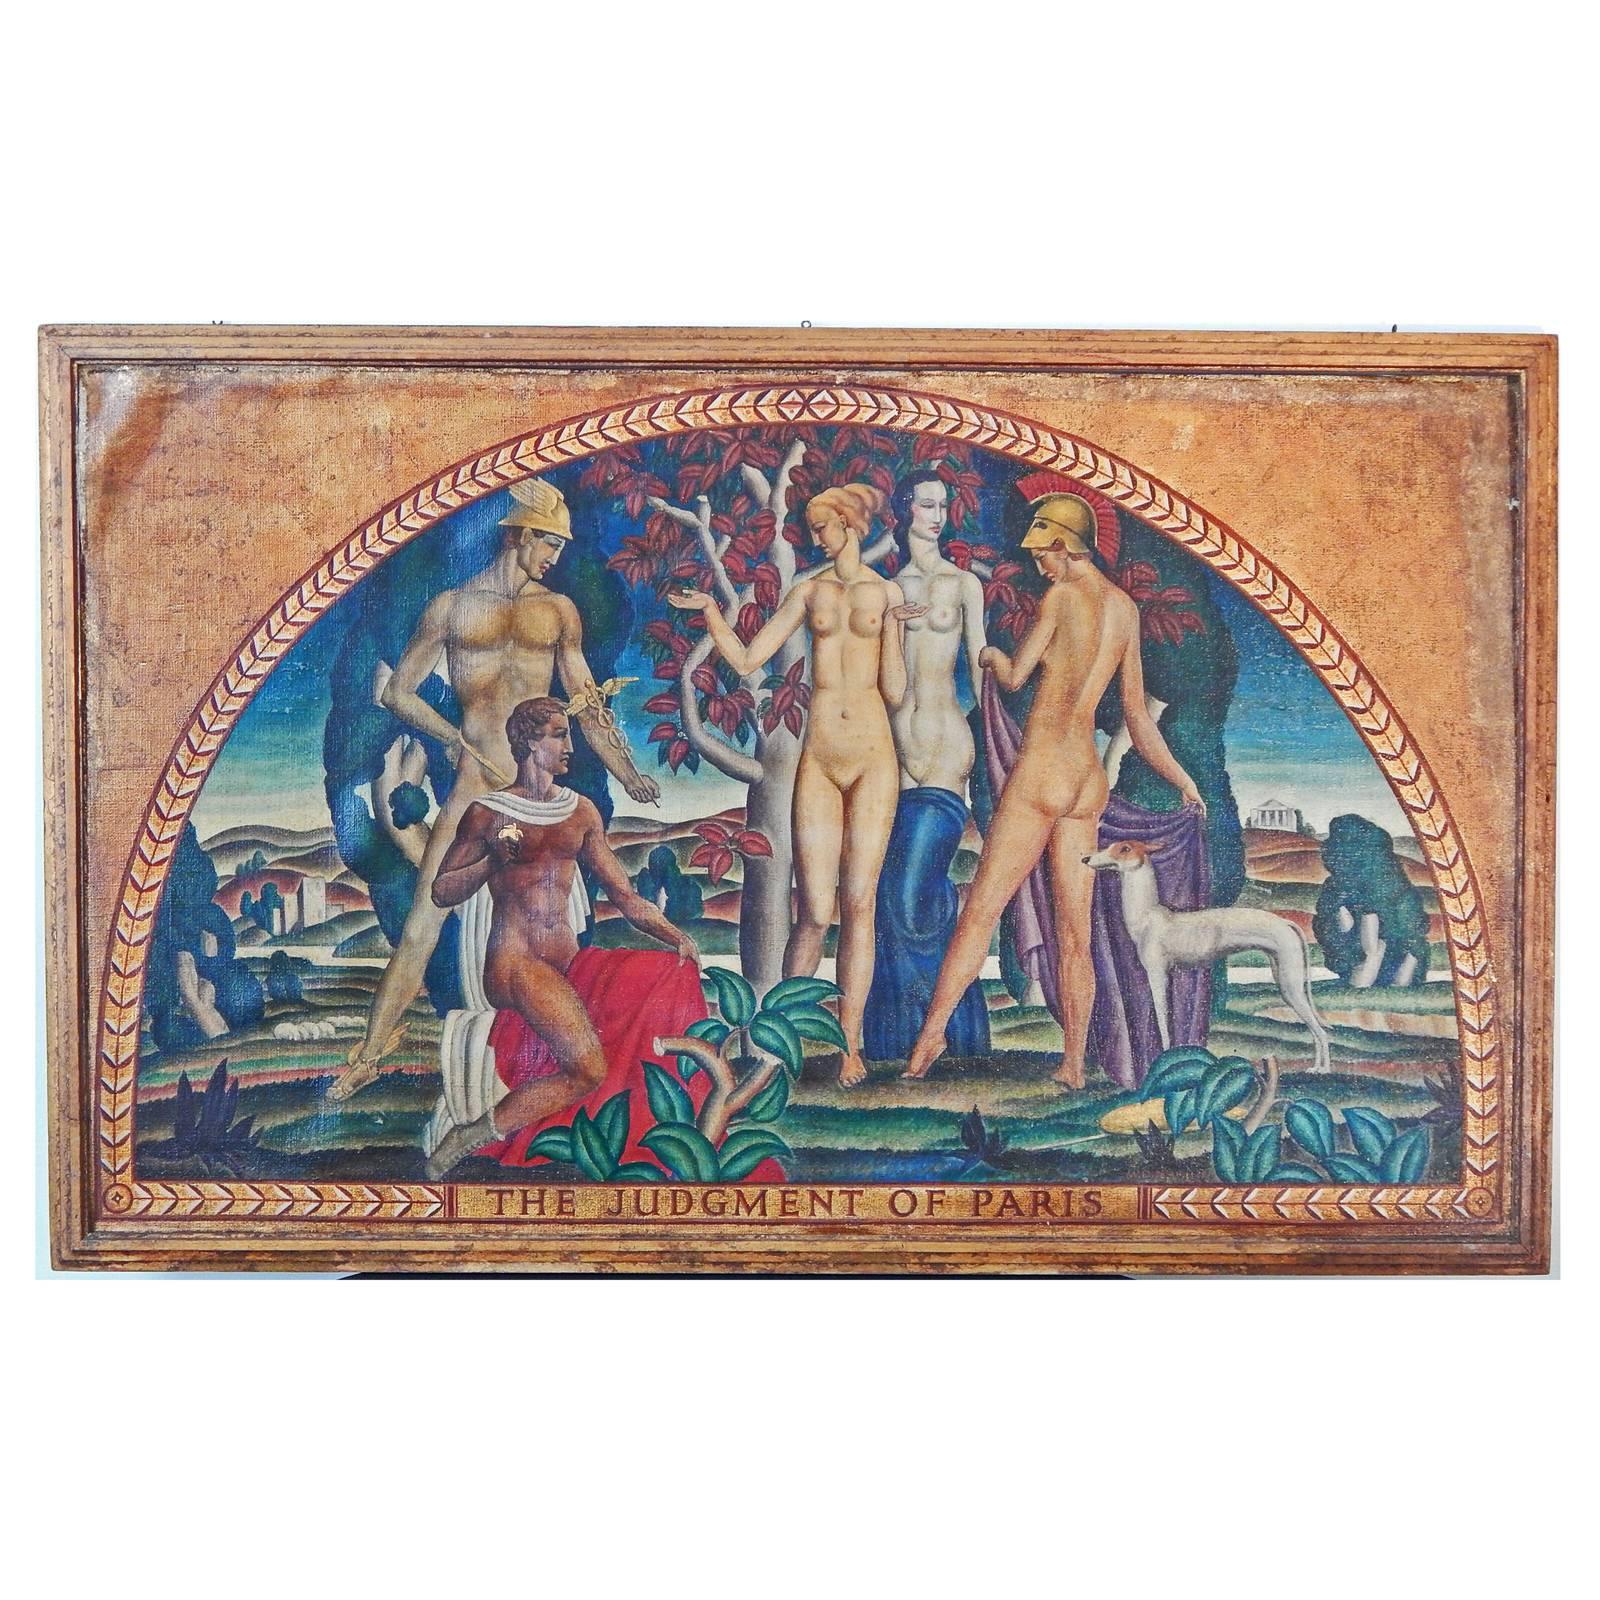 "the Judgment of Paris, " Fabulous Art Deco Mural with Nudes by Machin For Sale